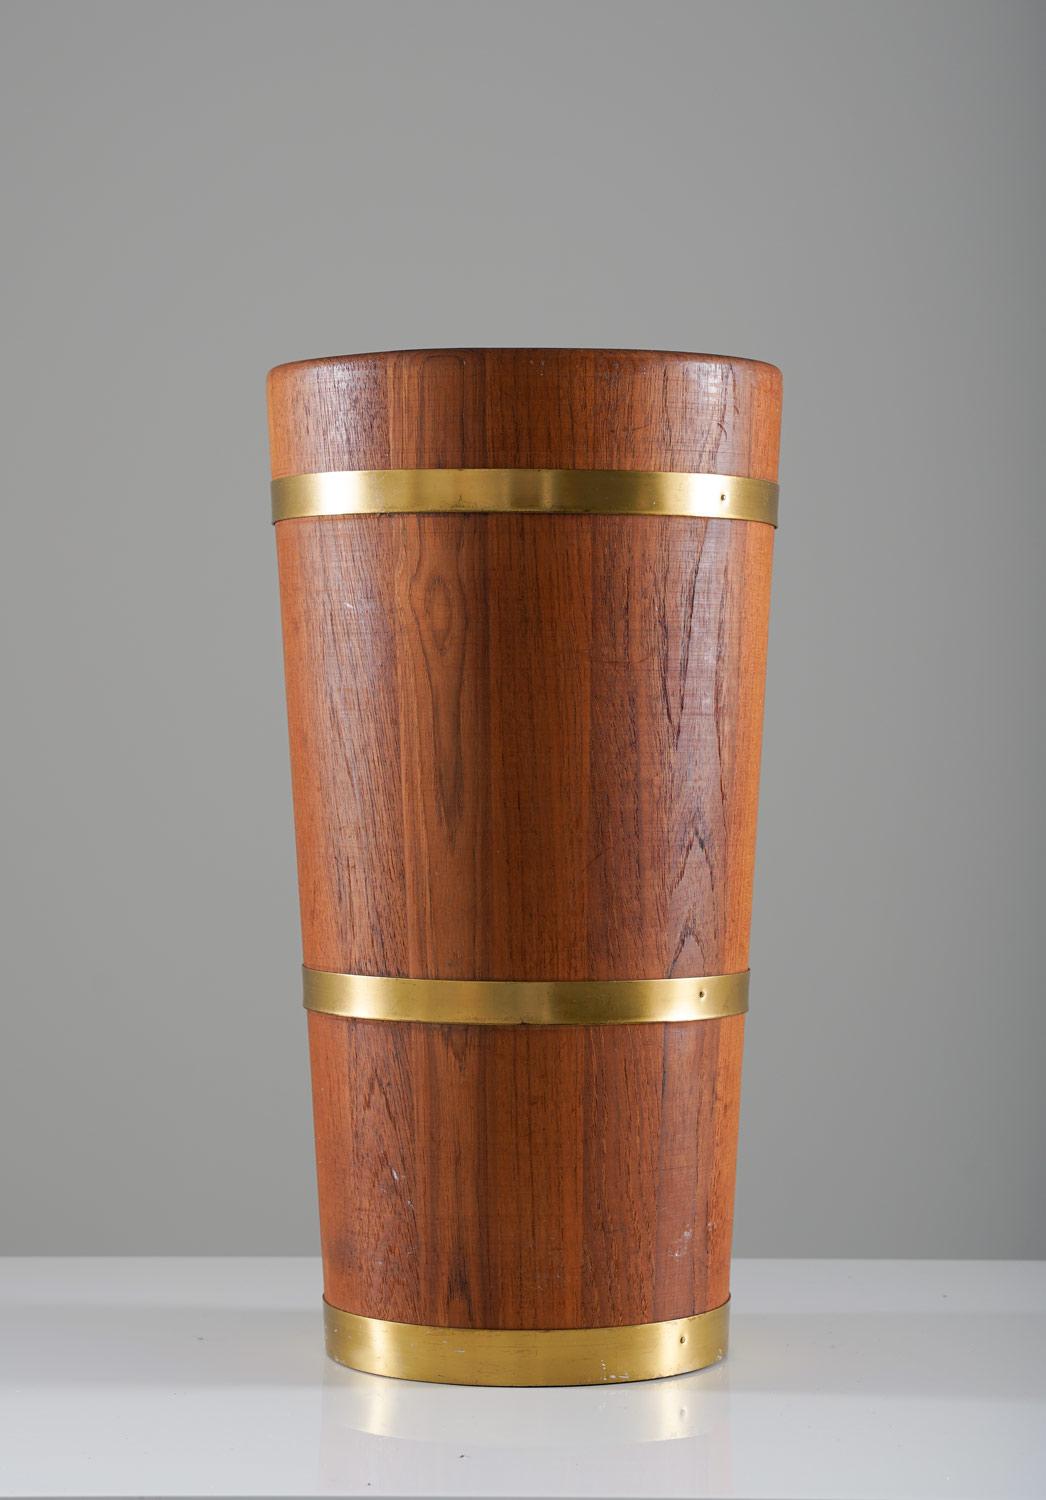 A stately and practical umbrella stand, constructed of solid and durable teak wood, enhanced by brass rings, is a functional and stylish addition to any entryway or foyer. The rich natural tones of the teak wood and the warm gleam of the brass